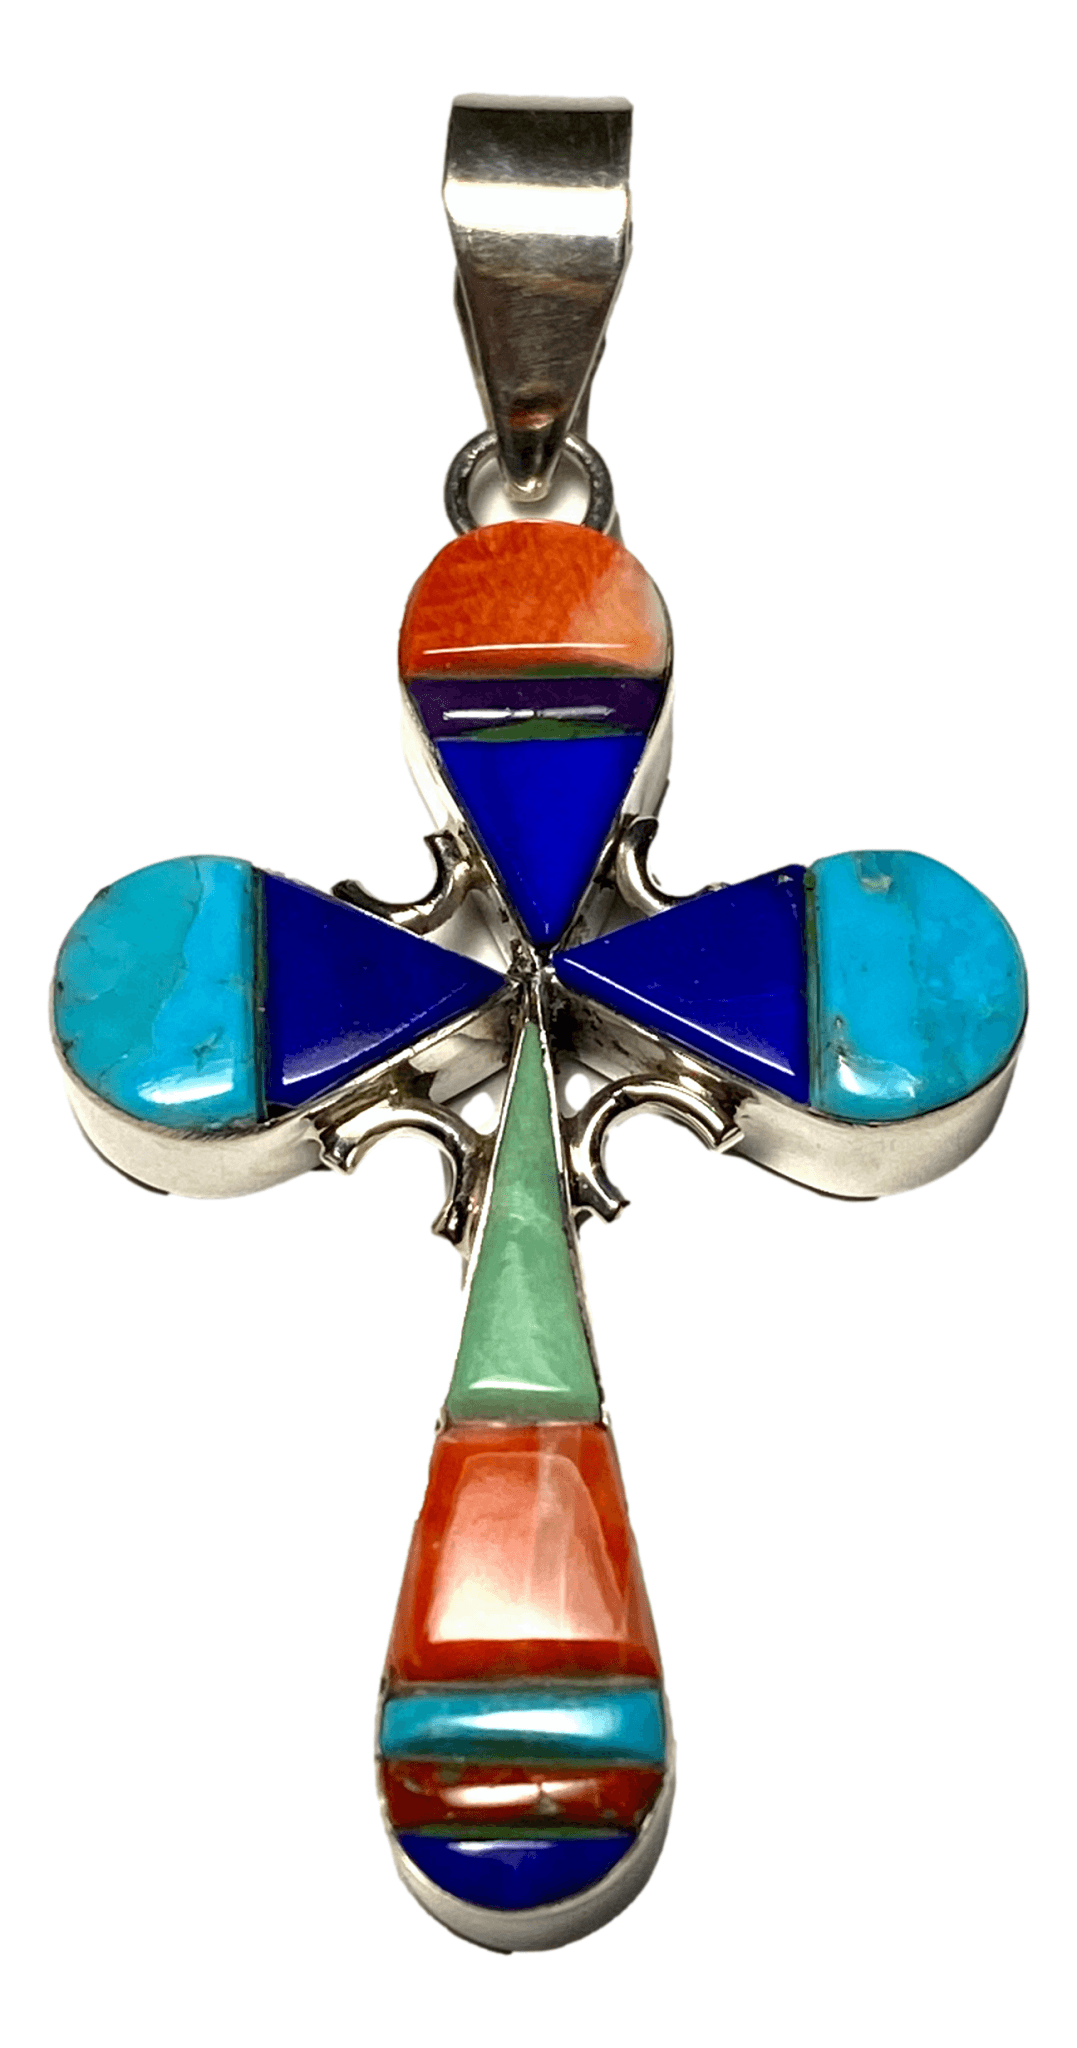 Pendant Cross Sterling Silver Round Edge Jet Stone Multi-Stone Inlay REVERSIBLE Handcrafted by Native American Artisans 2 1/2 L x 1 1/4 W inches - Ysleta Mission Gift Shop- VOTED El Paso's Best Gift Shop